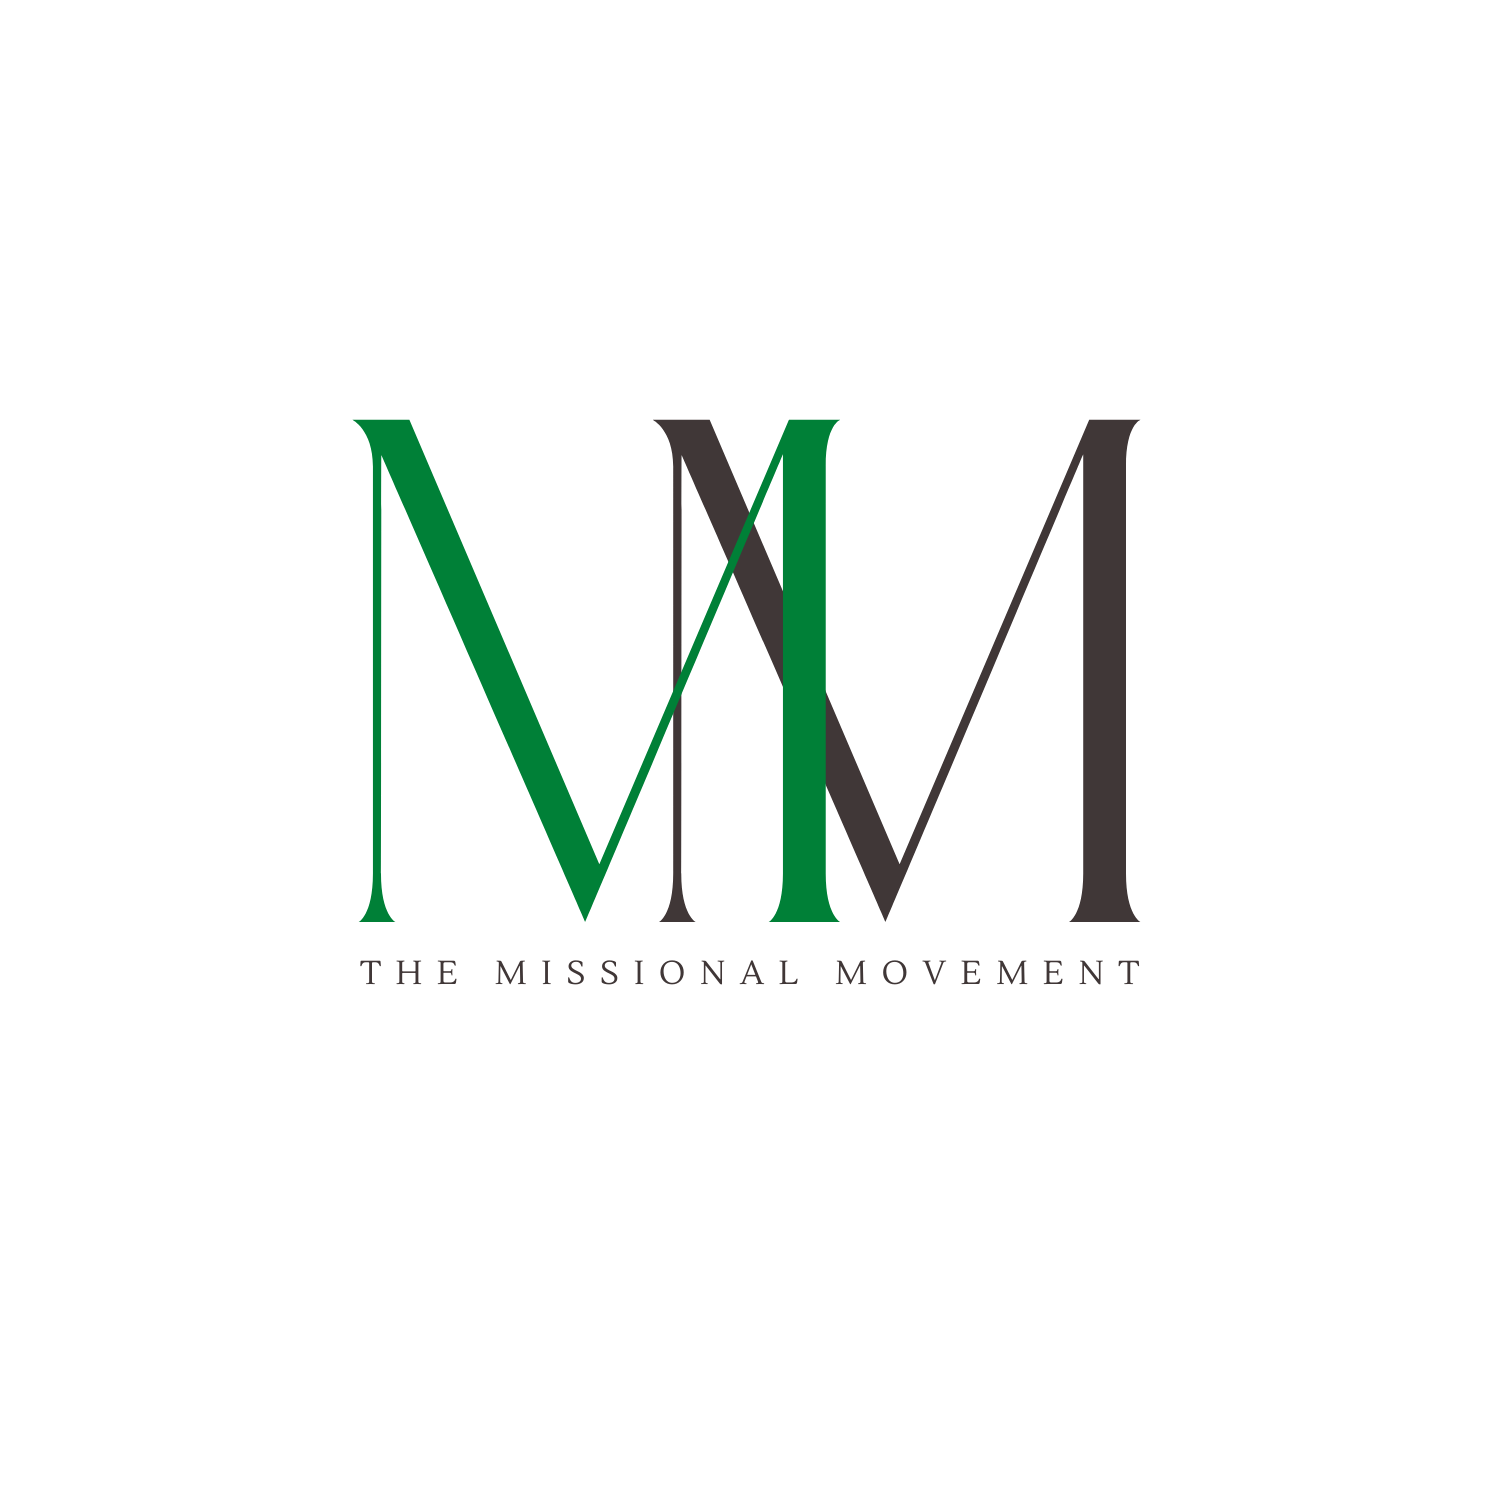 The Missional Movement